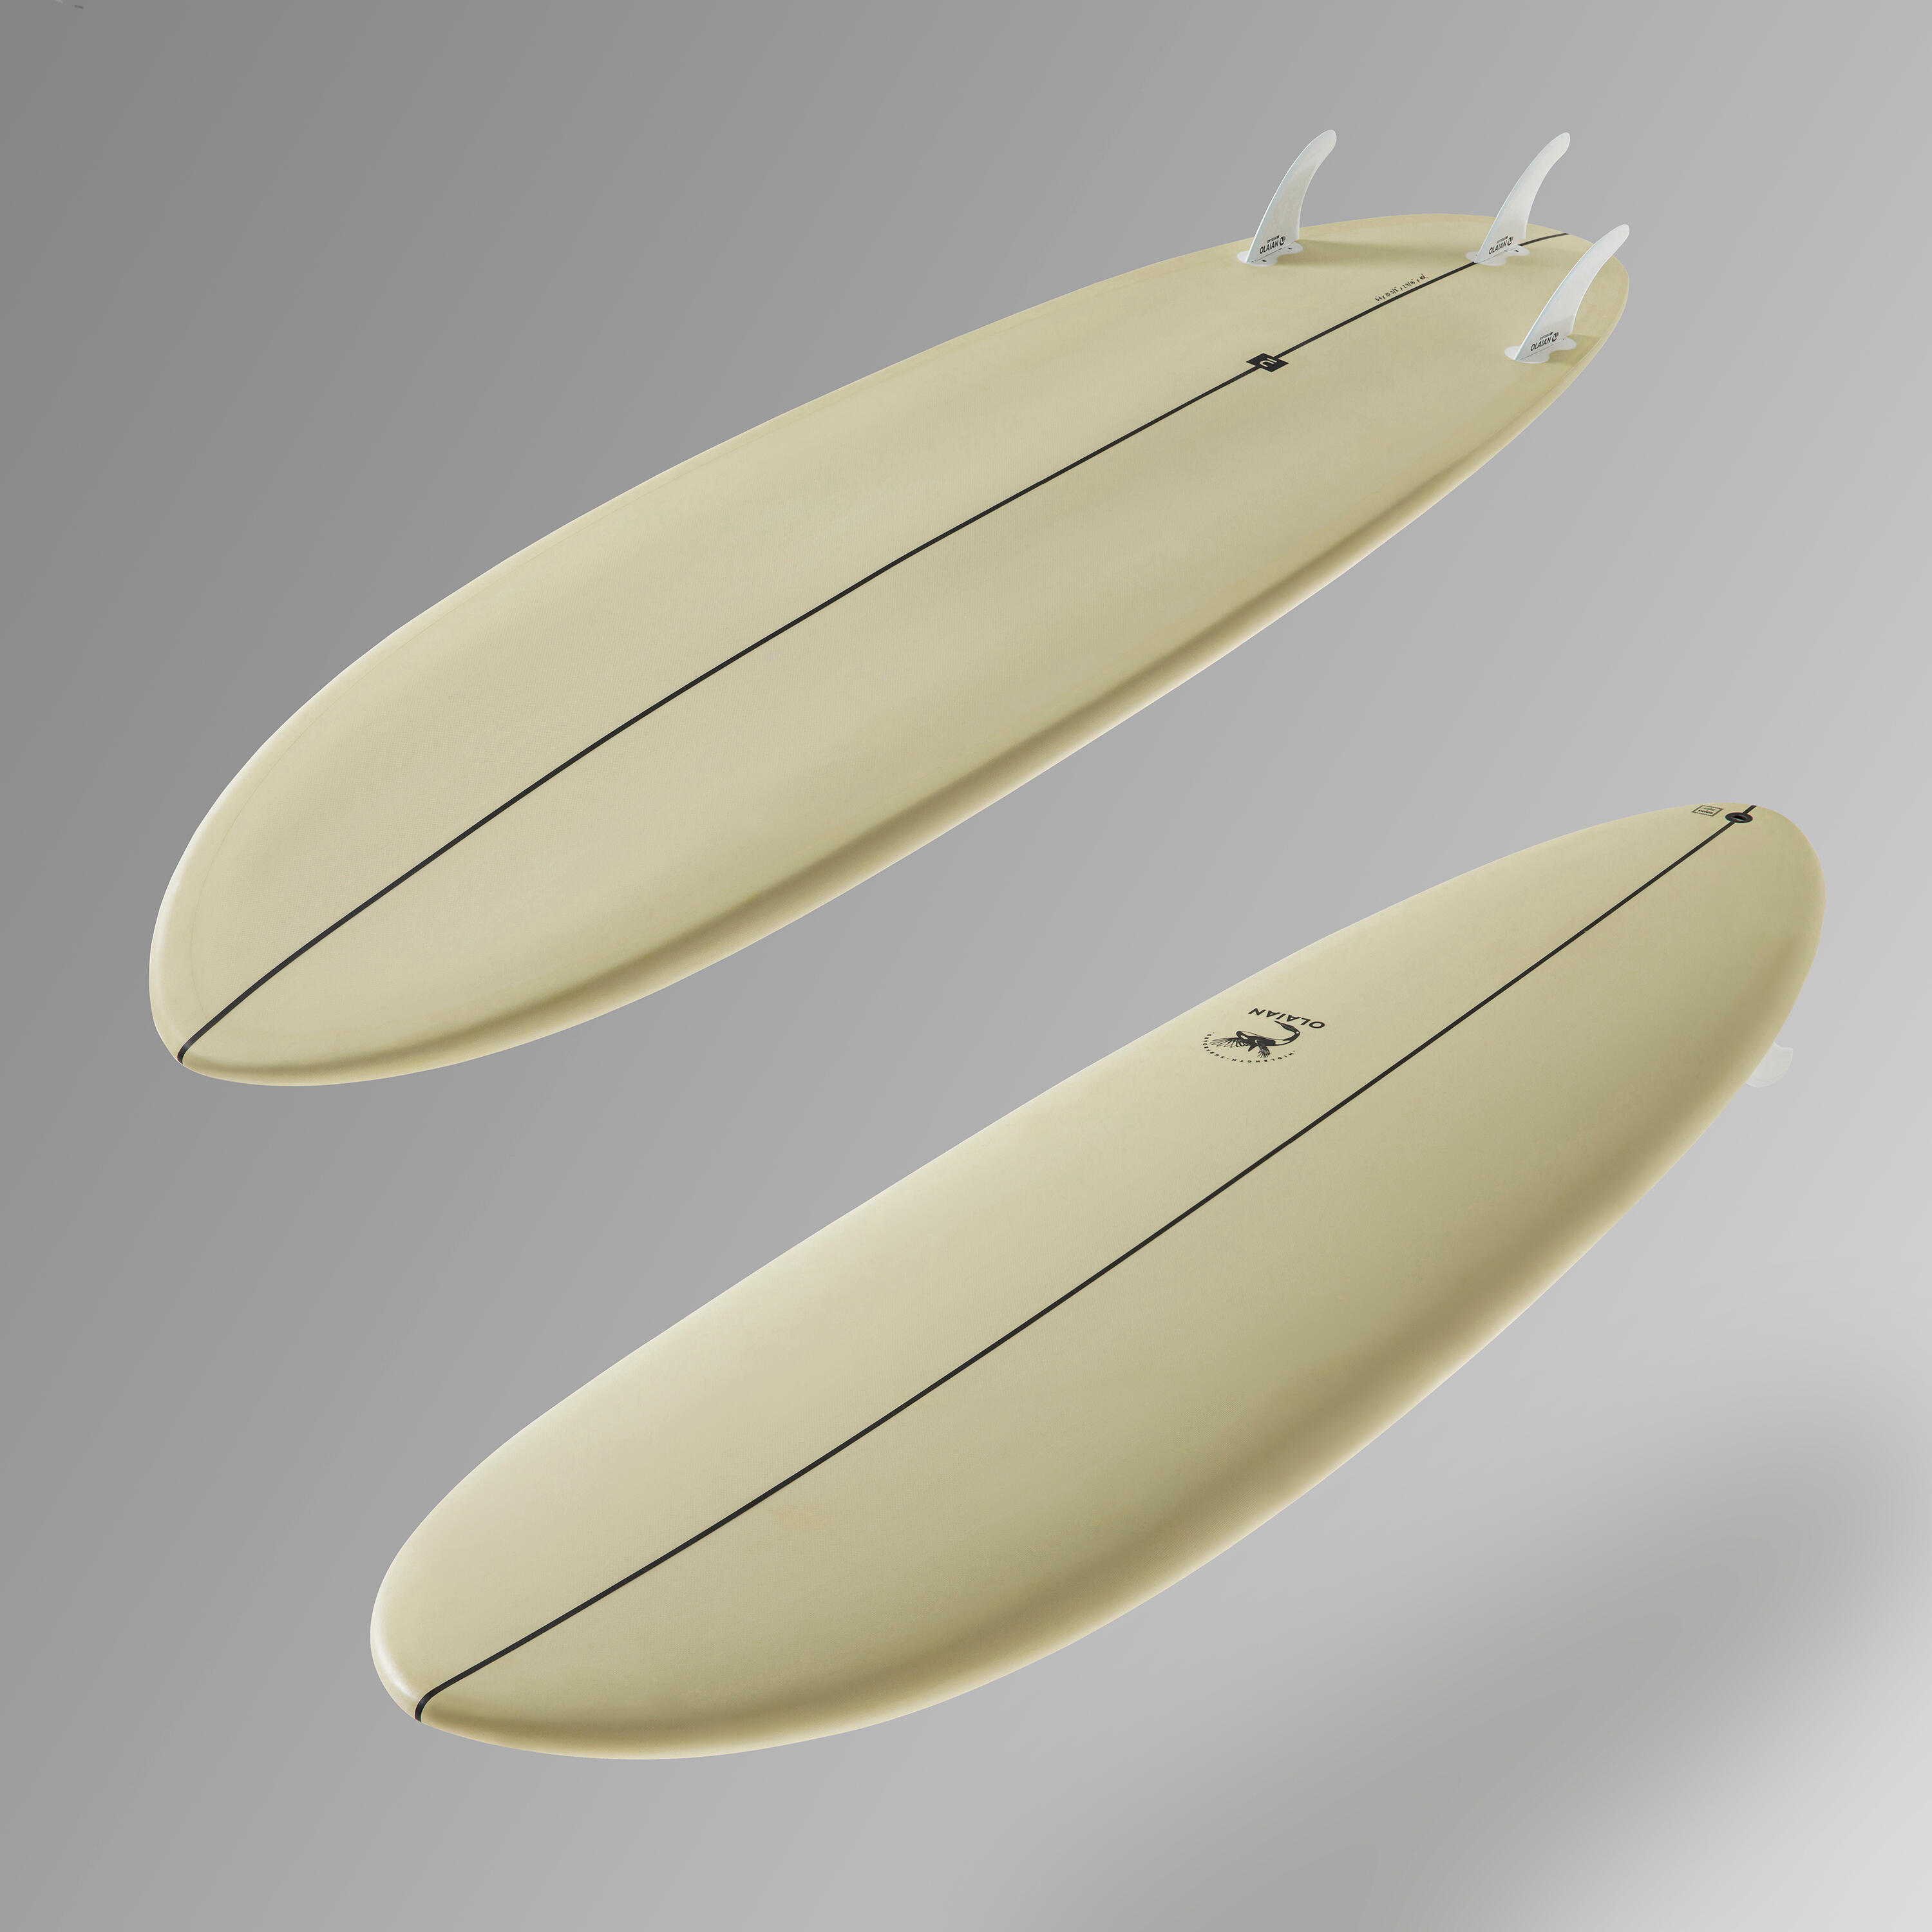 SURF 500 Hybrid 6'4", complete with 3 fins. 2/14